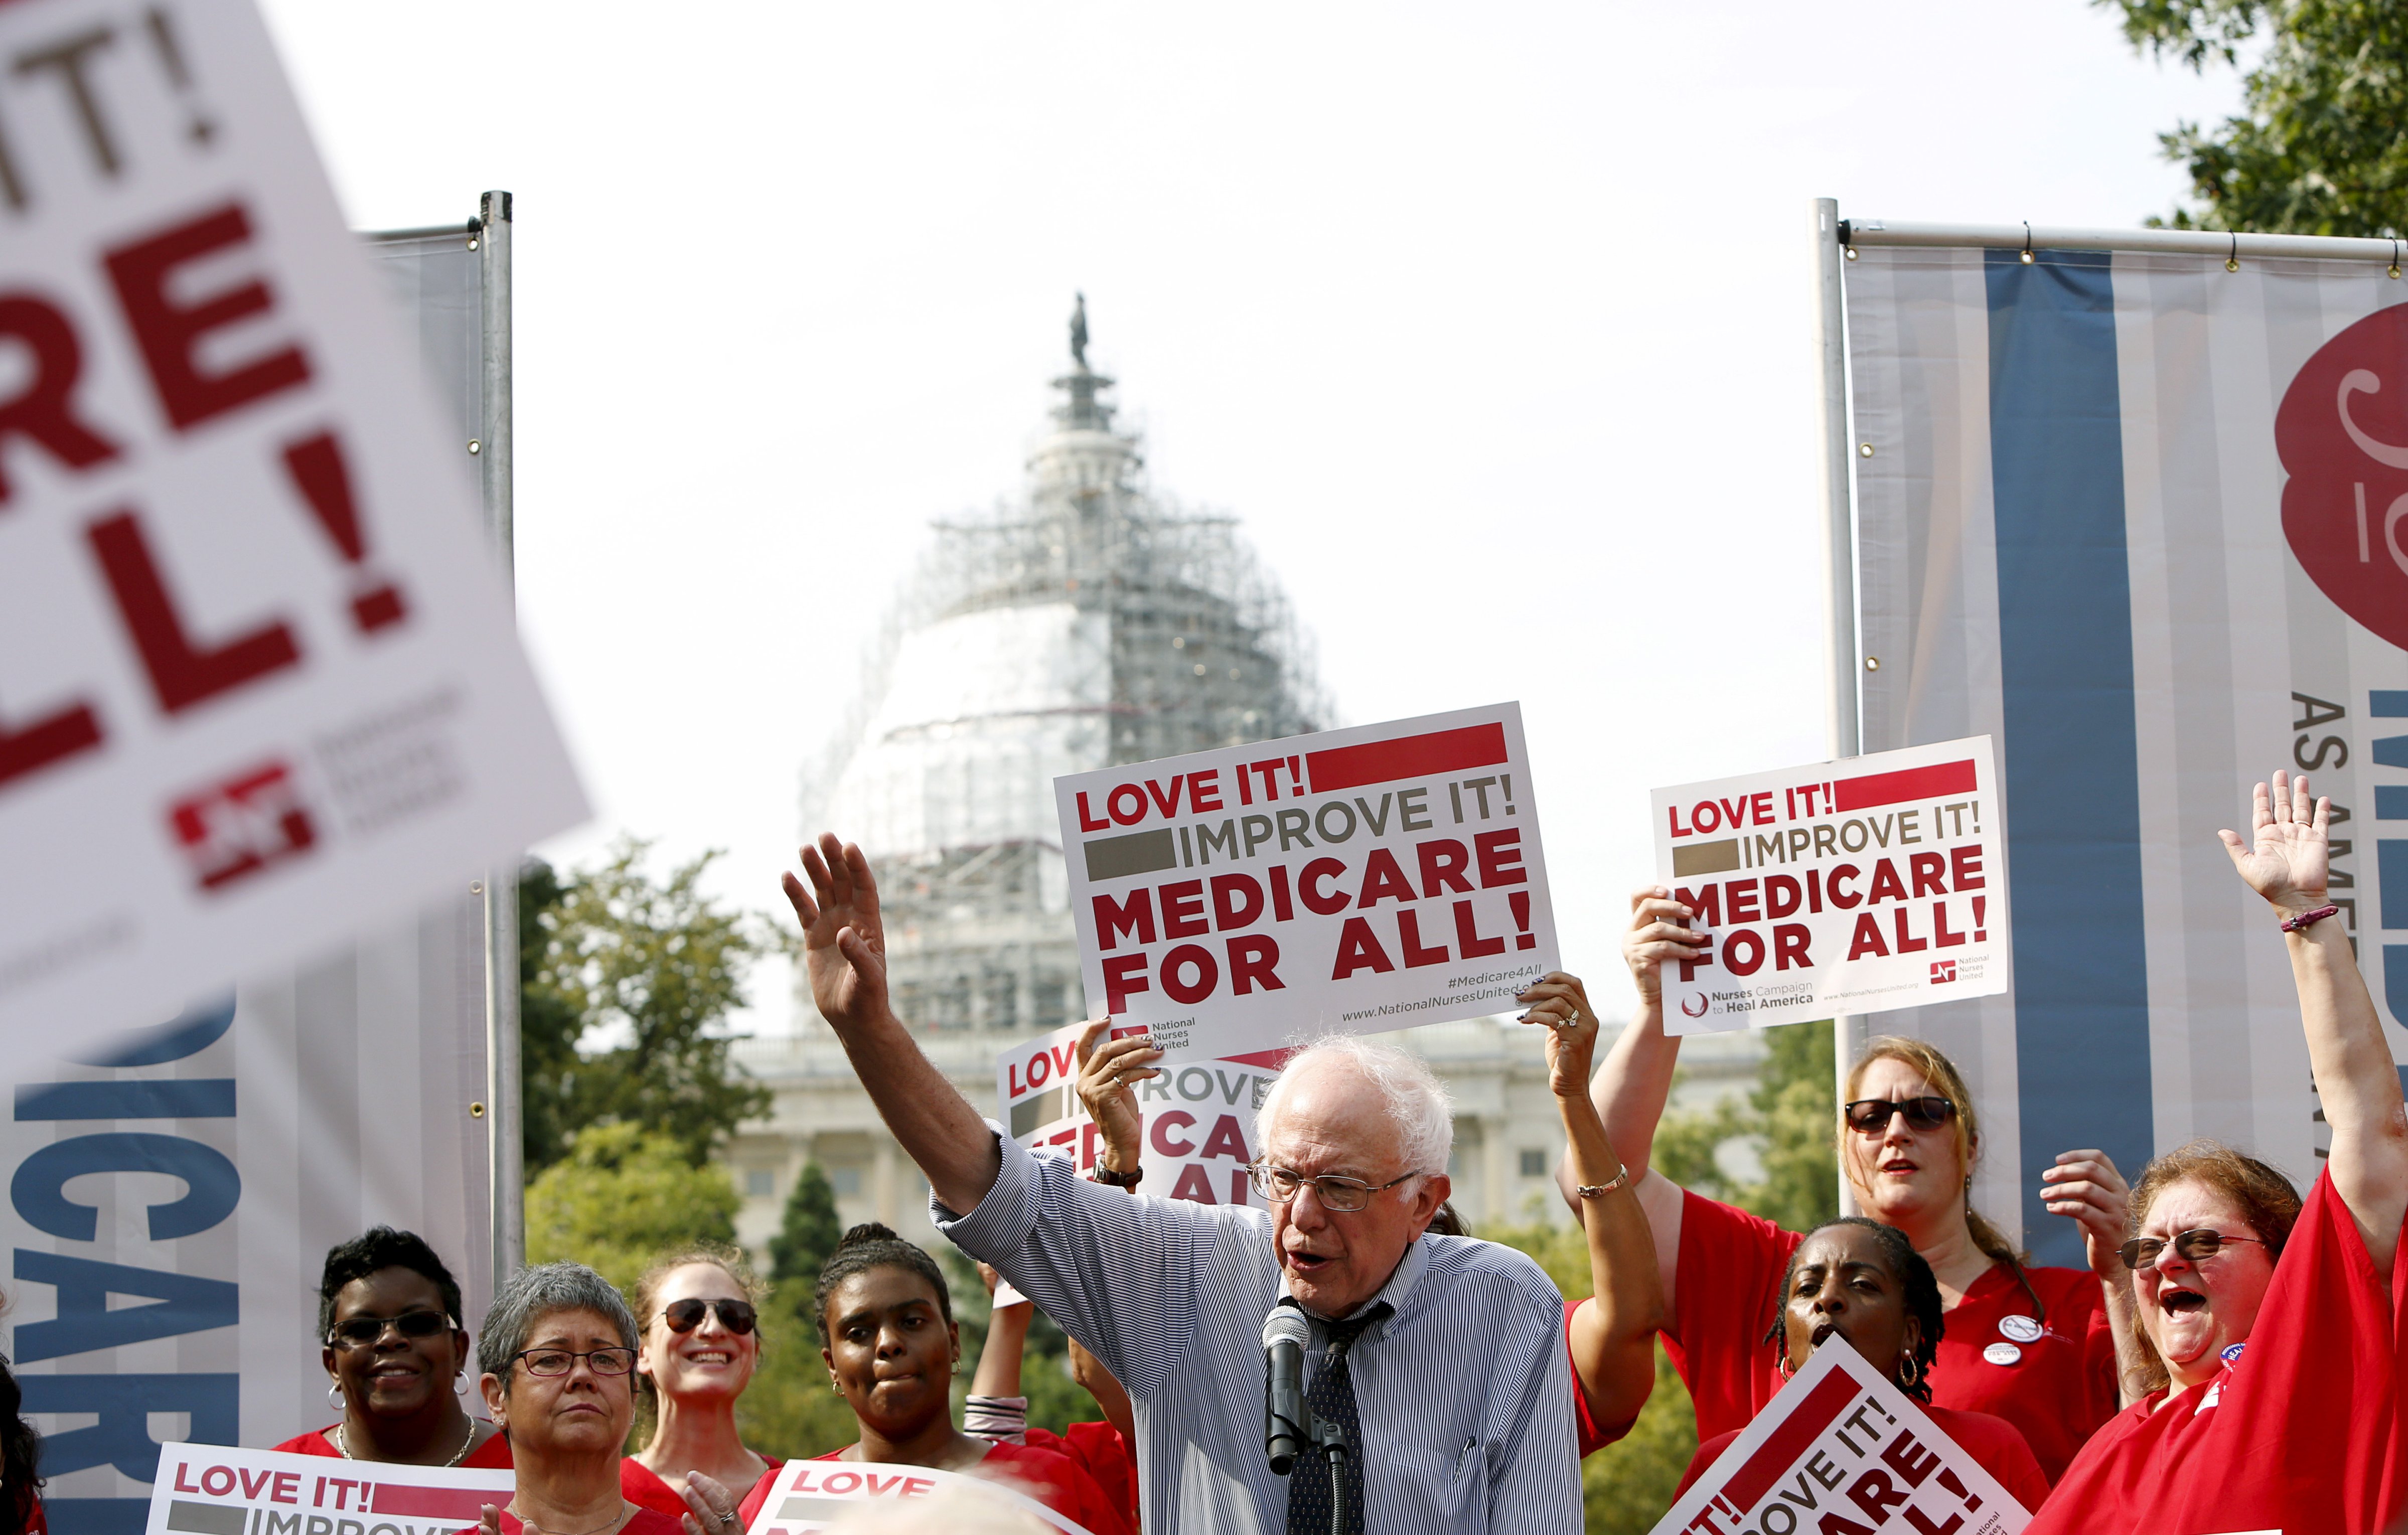 Democratic presidential candidate Sanders delivers remarks at a National Nurses United event in Washington